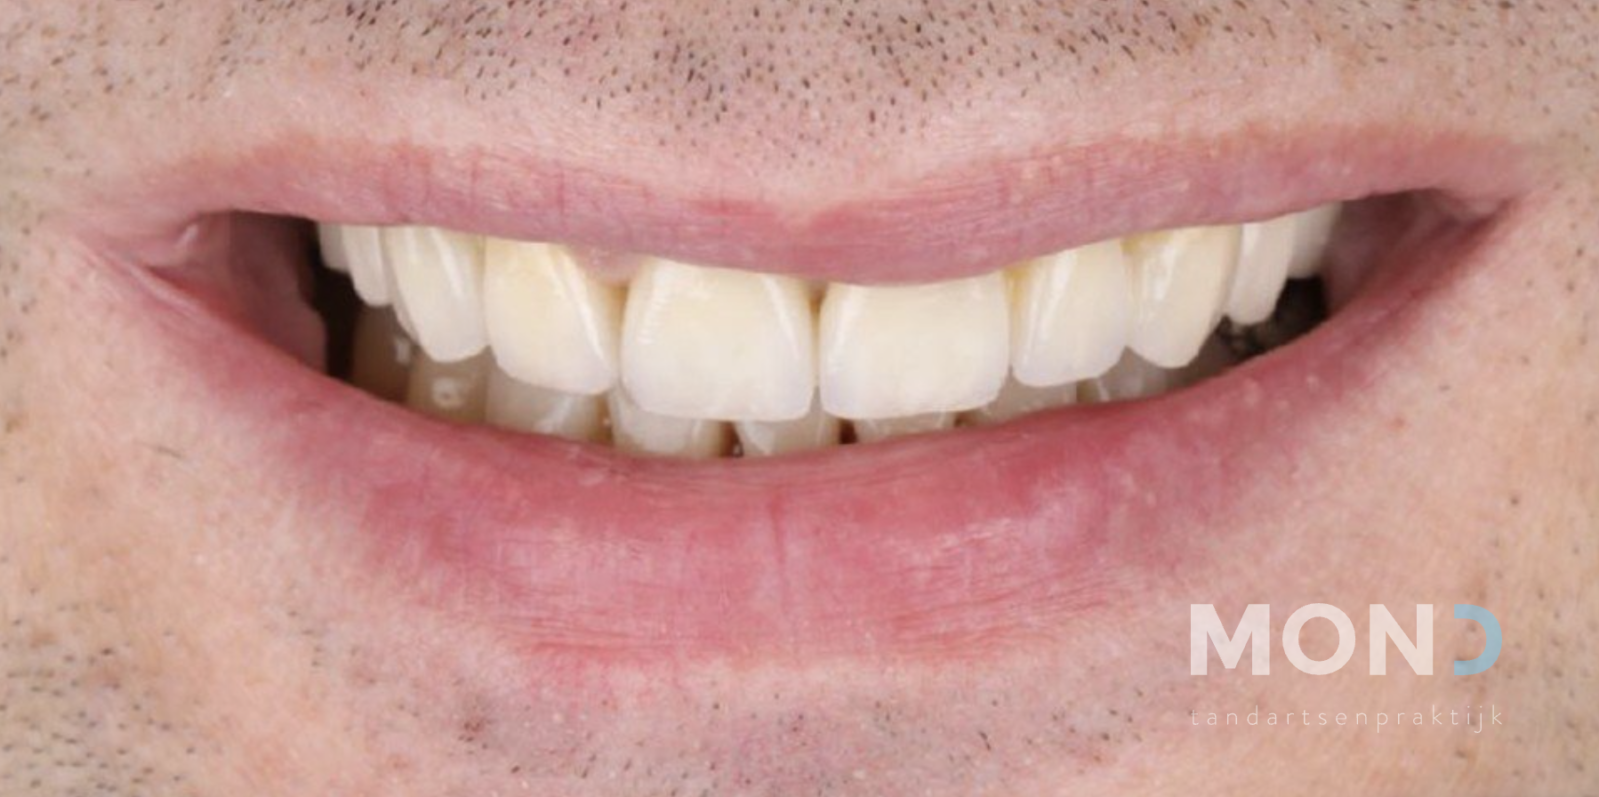 Combination of veneers with porcelain and composite